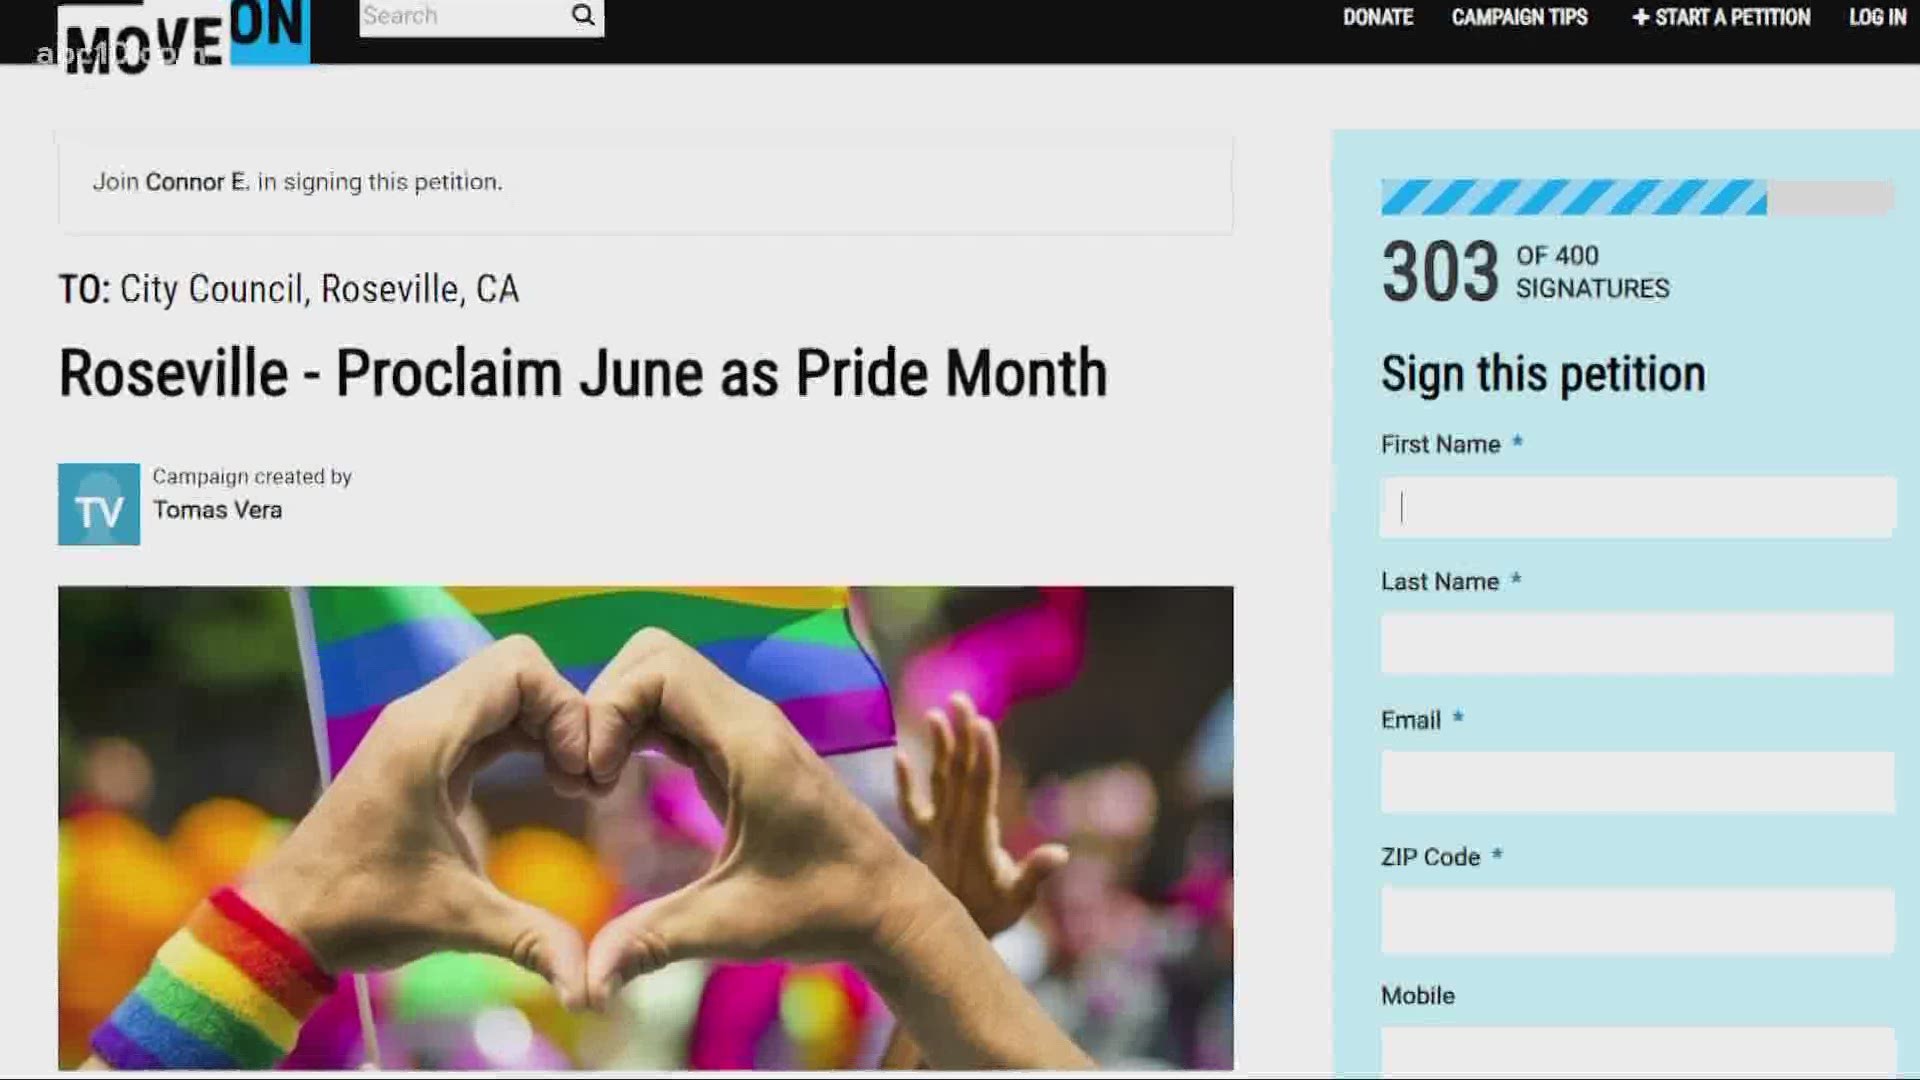 A new petition created by advocates in the LGBTQ+ community calls on the city of Roseville to proclaim June as Pride Month.